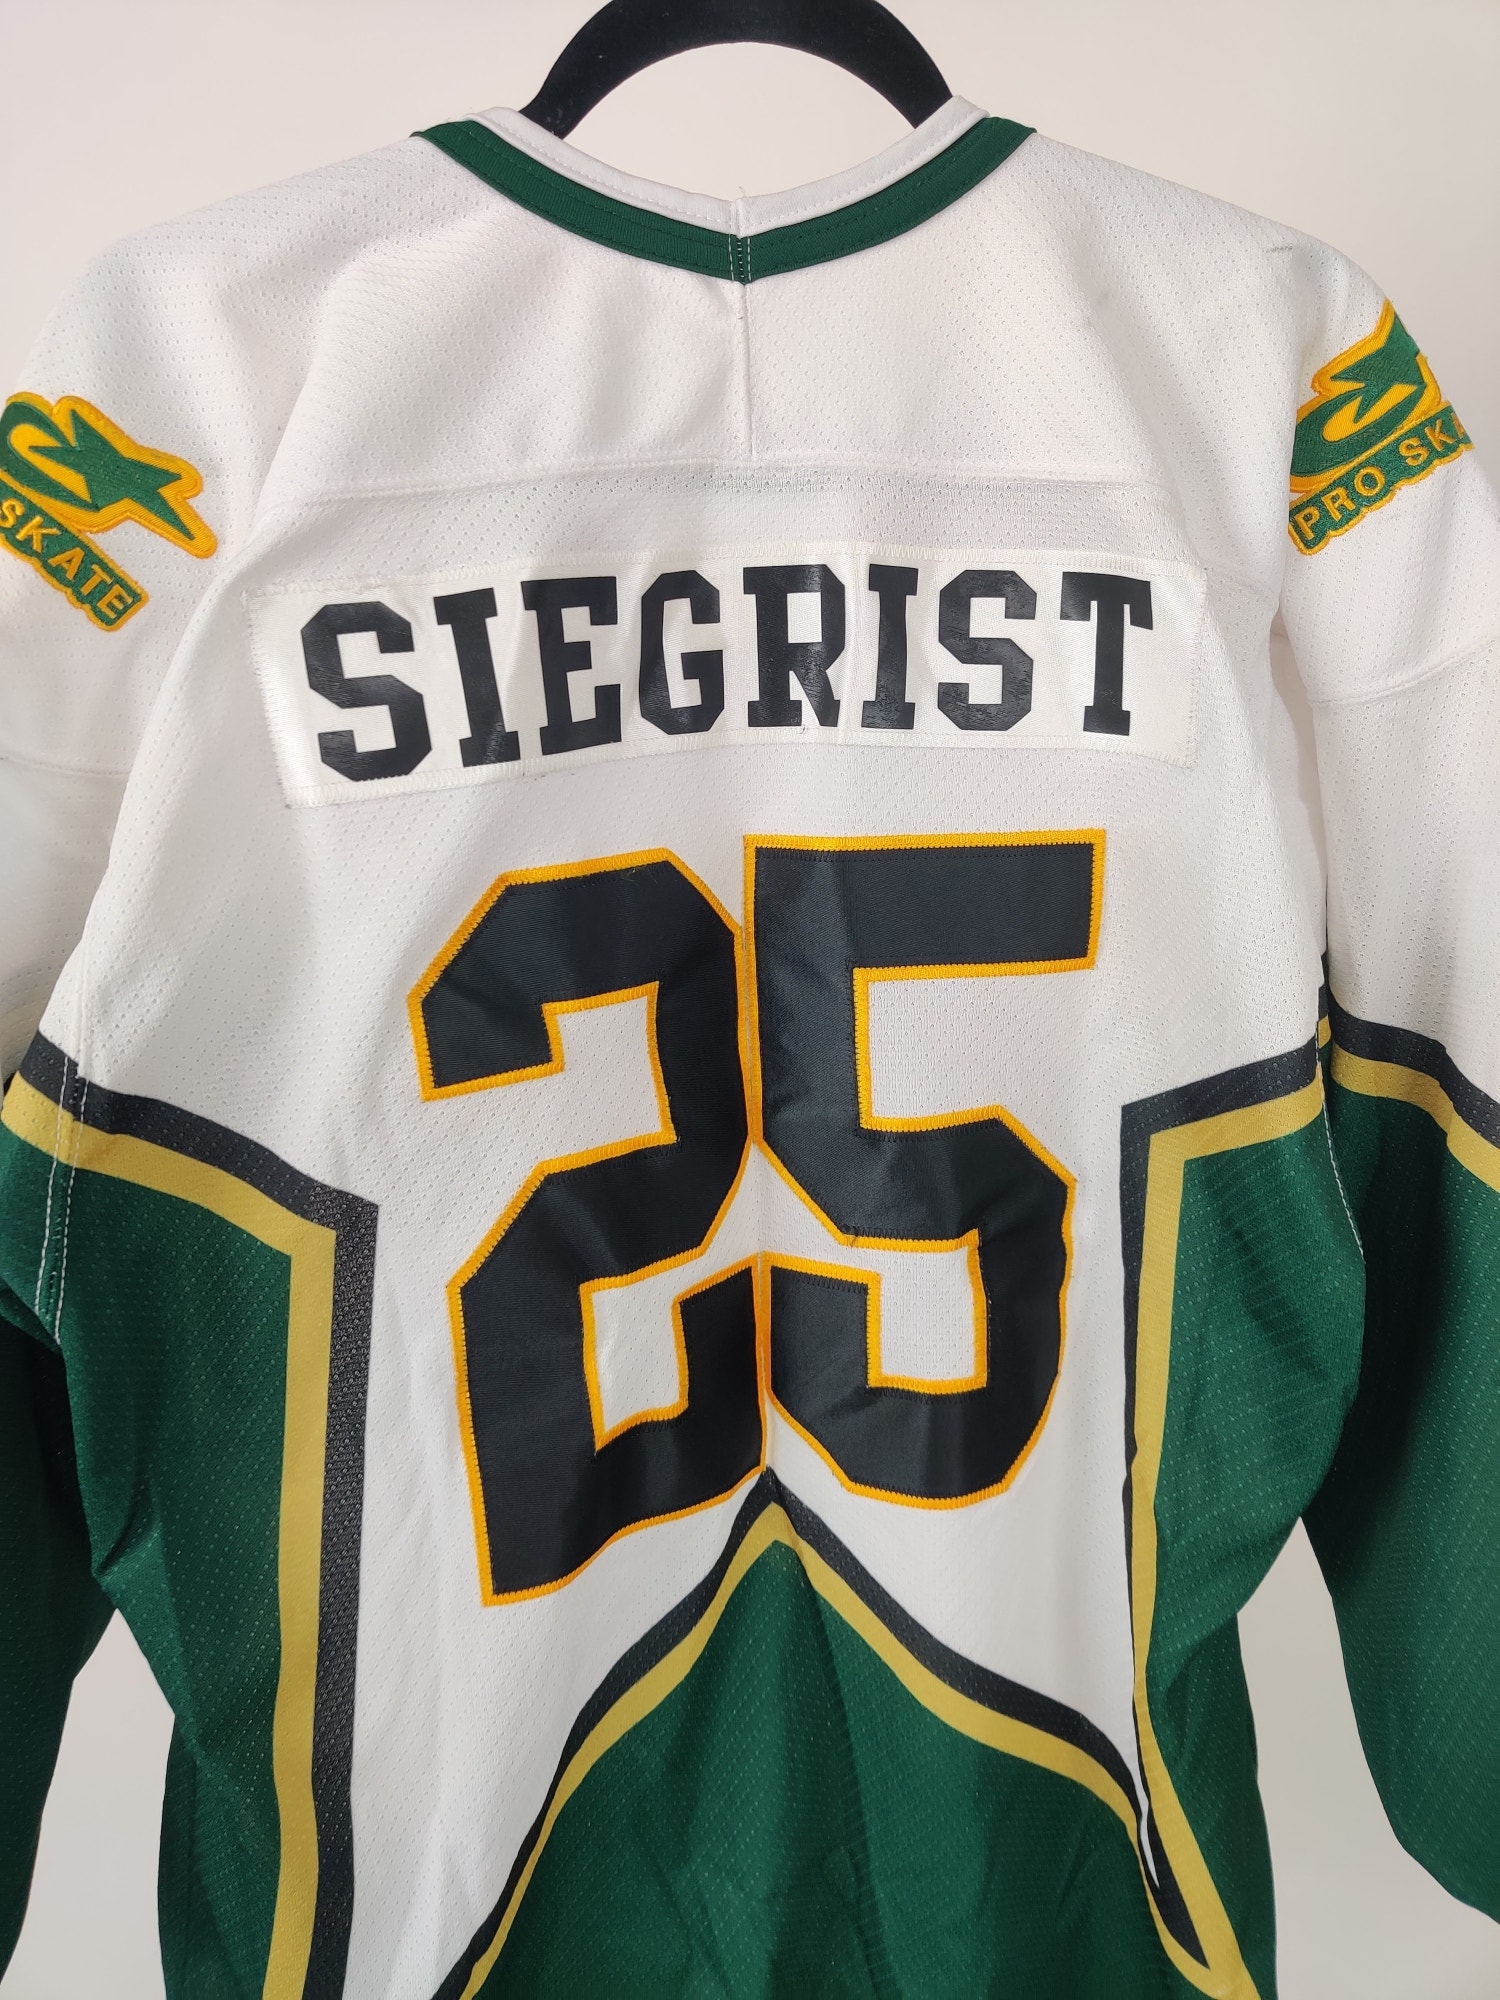 (V)CCM PRO SKATE STARS SIEGRIST #25 RARE Men HOCKEY CANADA MADE jersey S - Picture 10 of 10